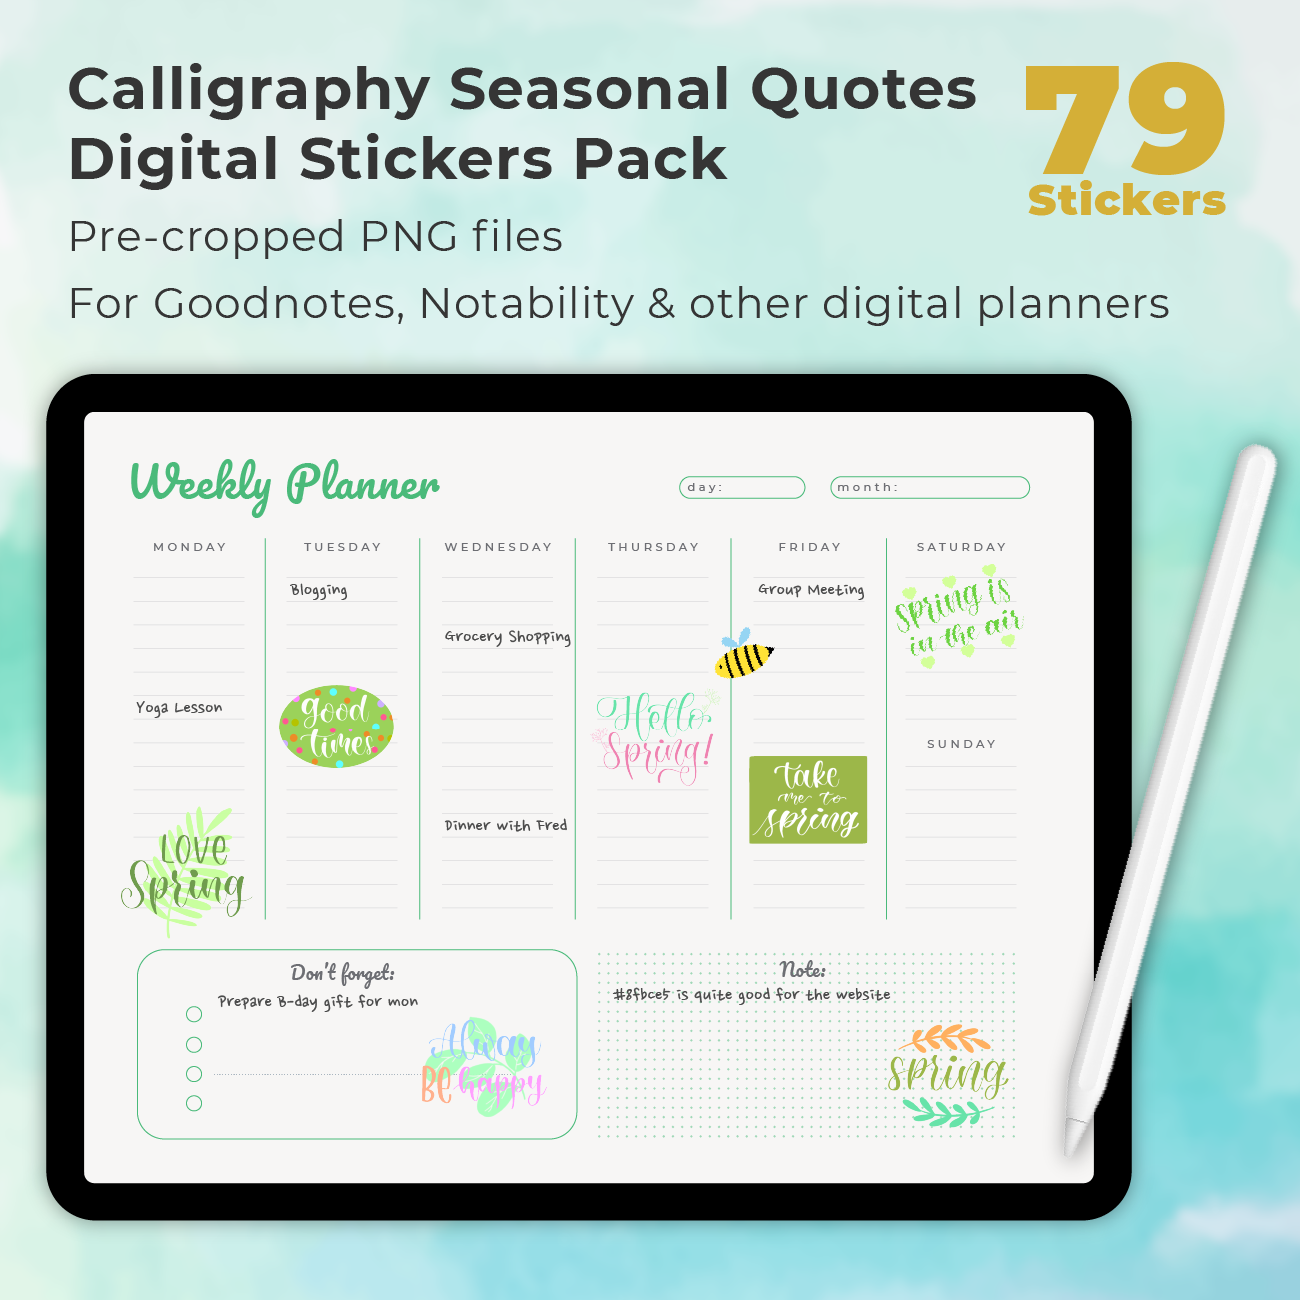 79 Calligraphy Seasonal Quotes Digital Stickers Pack